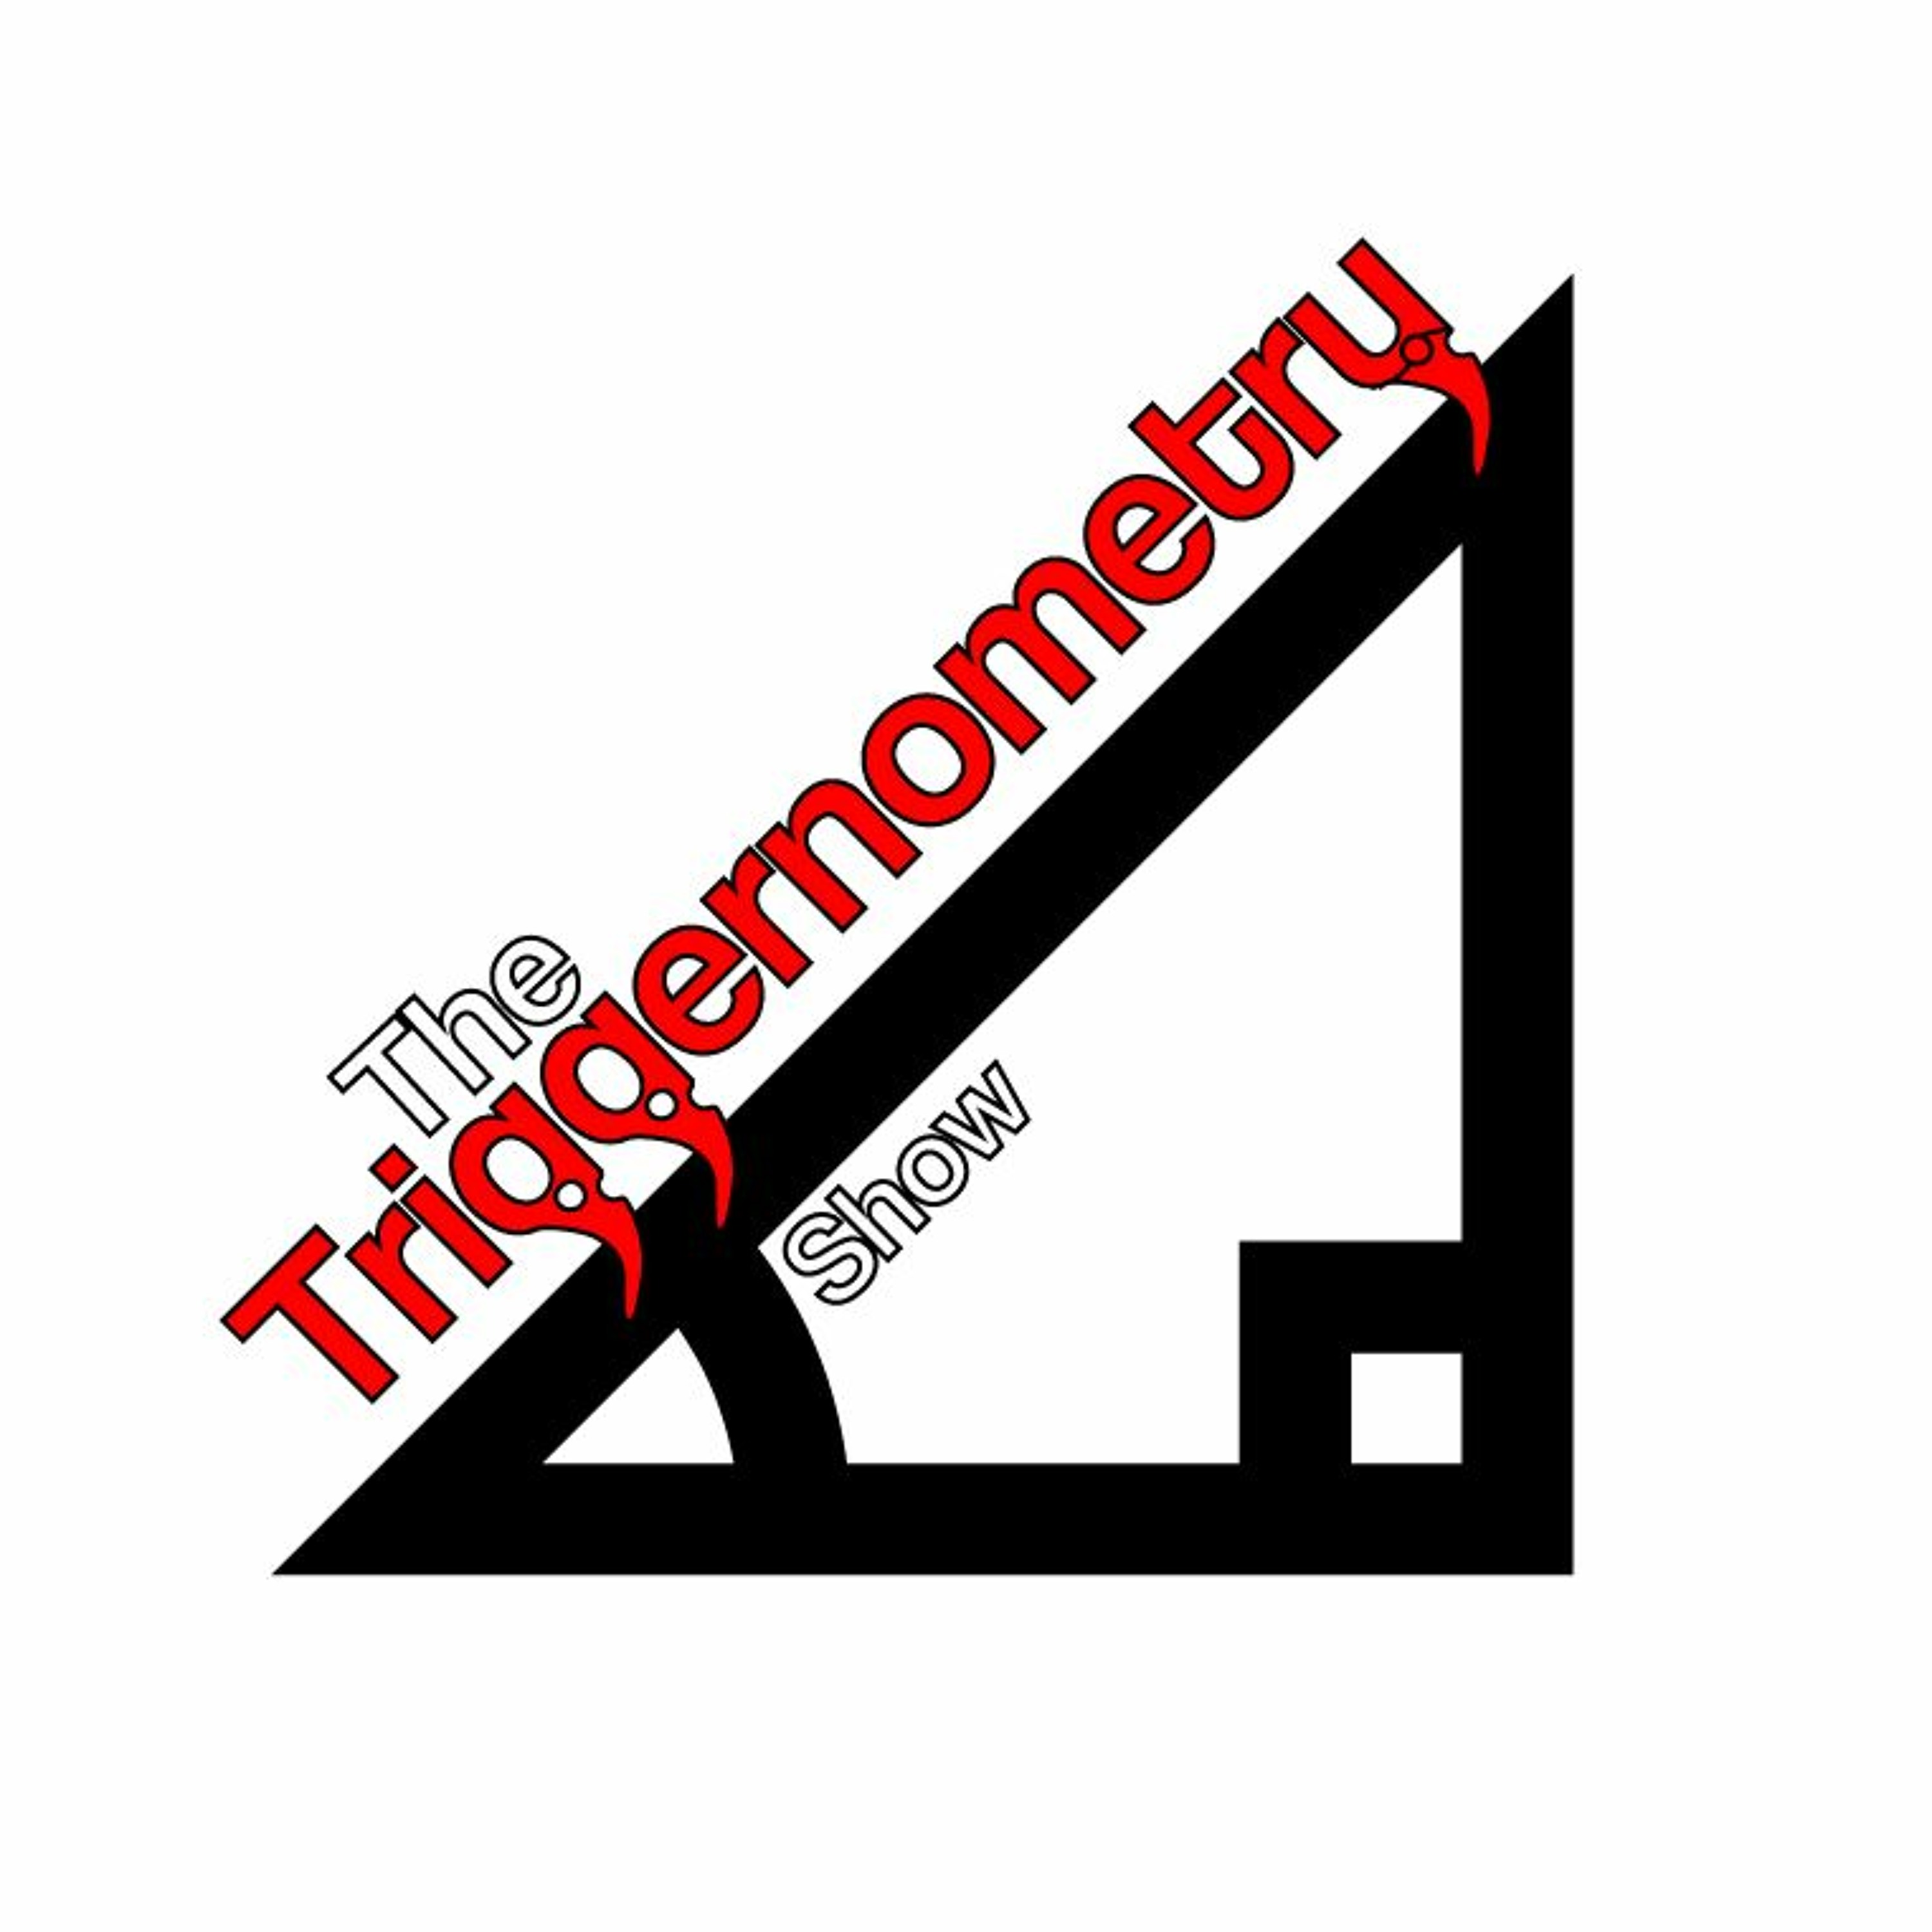 The Triggernometry Show - 4th March 2021 - Kerry, Graeme, Ian, Sam, Dirk